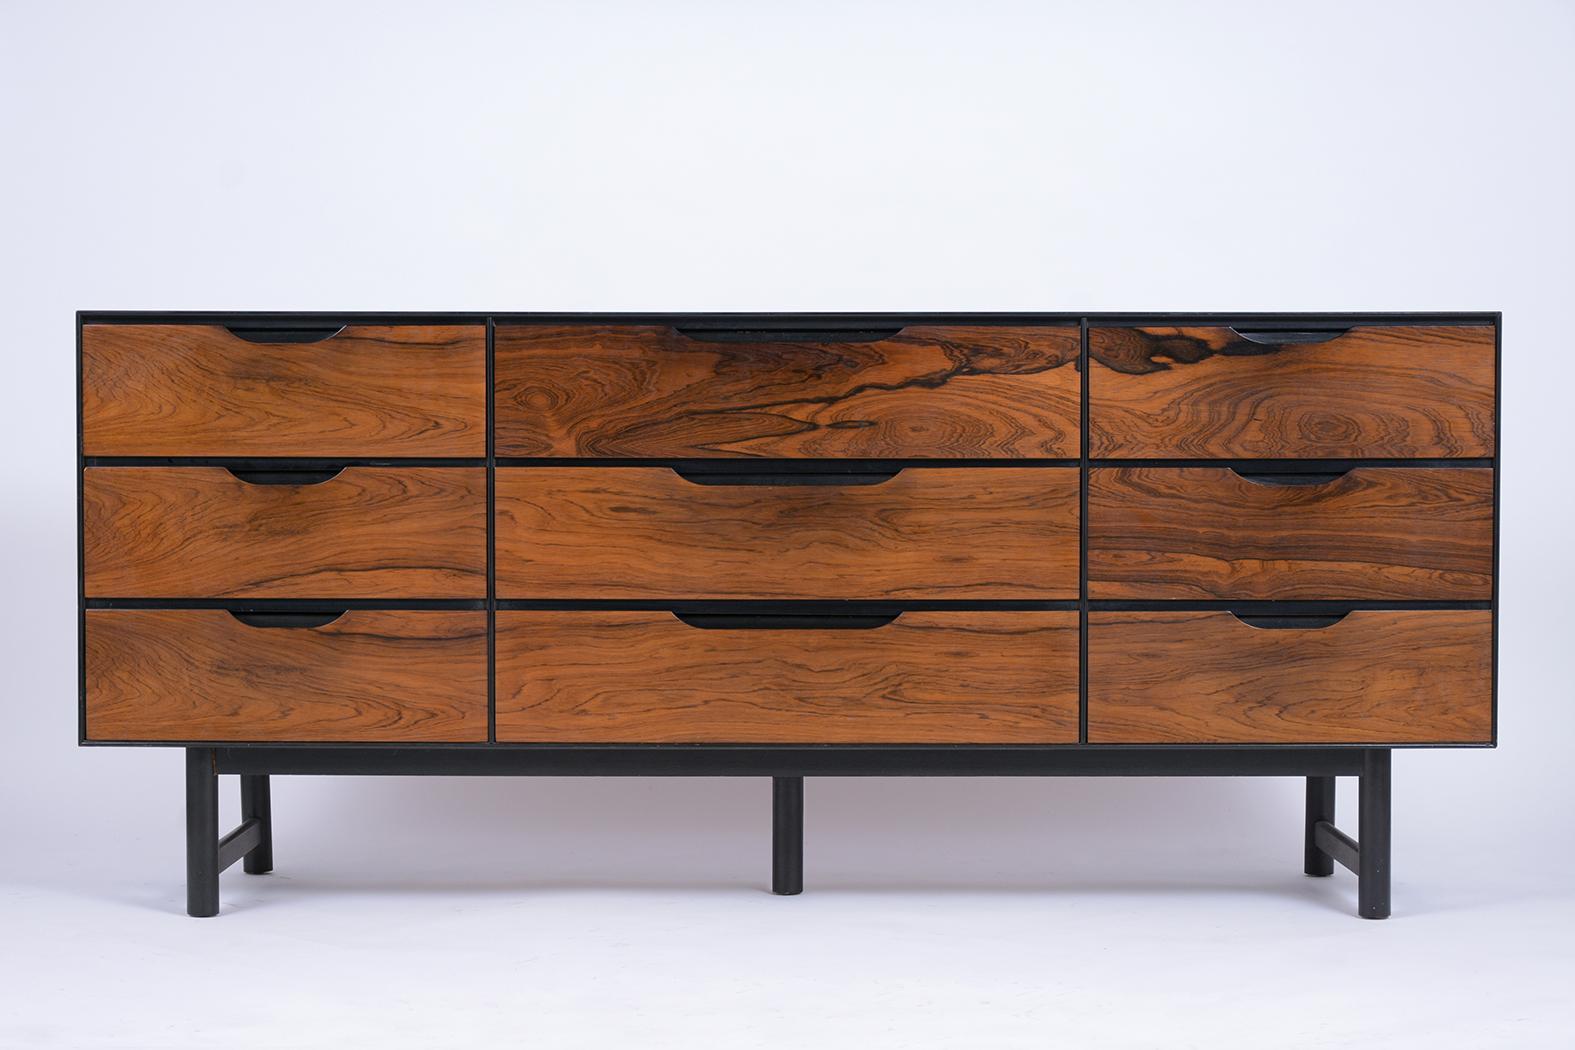 This Mid-Century Modern Dresser is made out of rosewood and has been completed restored. This credenza features an exceptional rosewood grain design, and a newly stained ebonized & rosewood color combination with a lacquer finish. The nine drawers